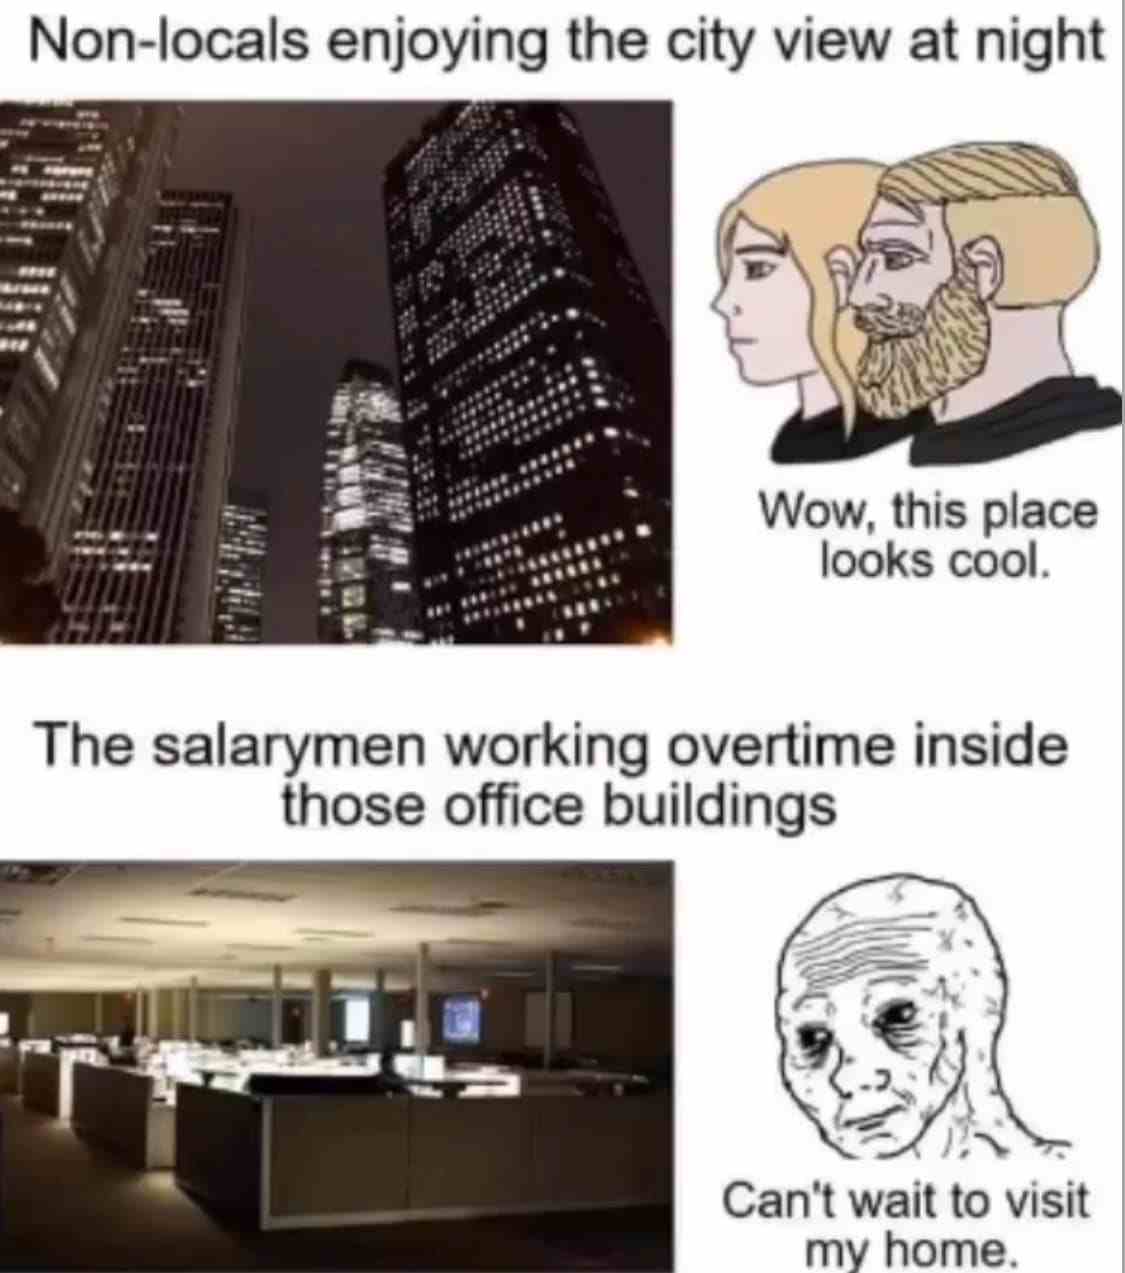 The salary men working overtime inside those office buildings